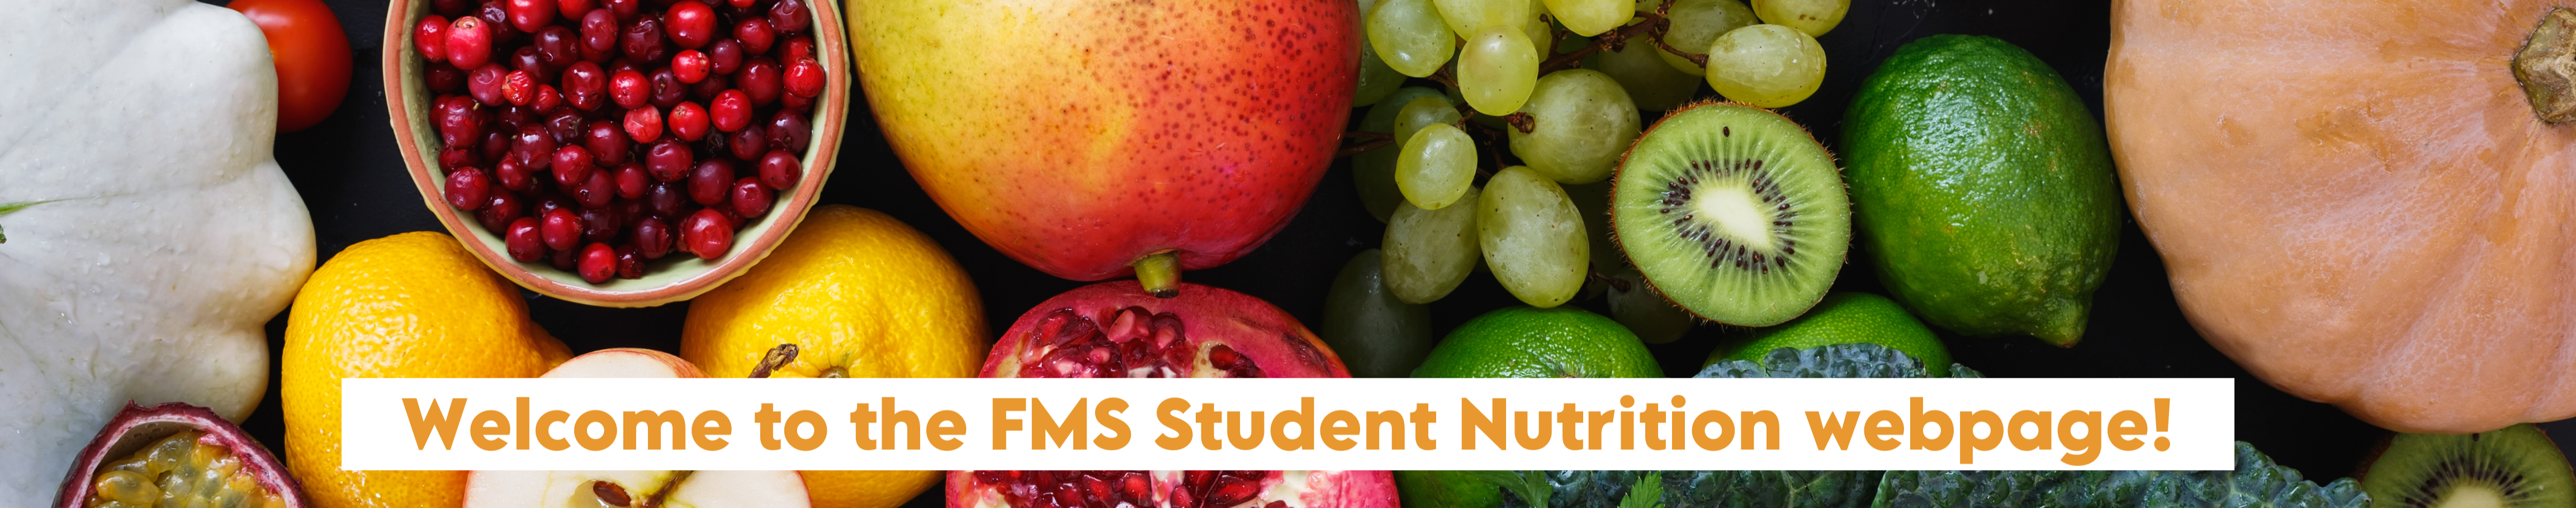 Welcome to the FMS Student Nutrition webpage!